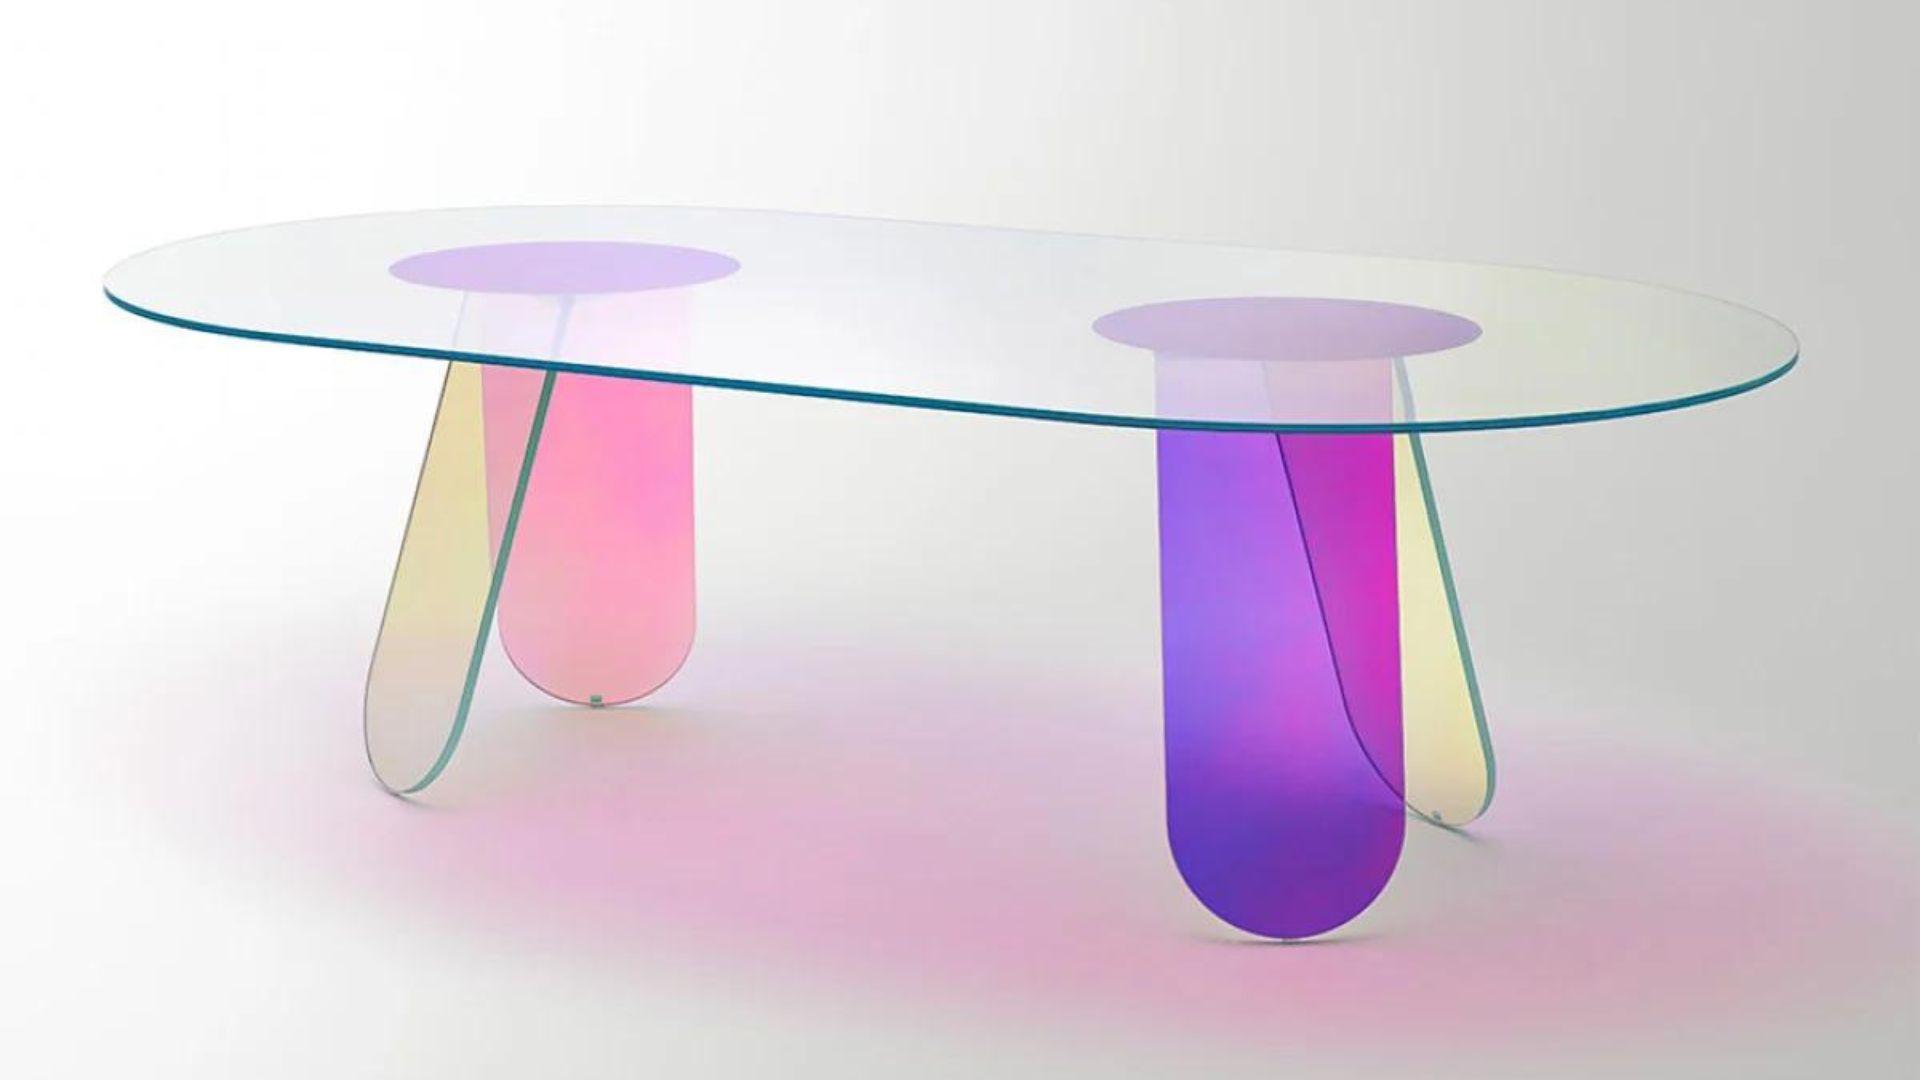 Shimmer collection: stunning glass furniture pieces : DesignWanted